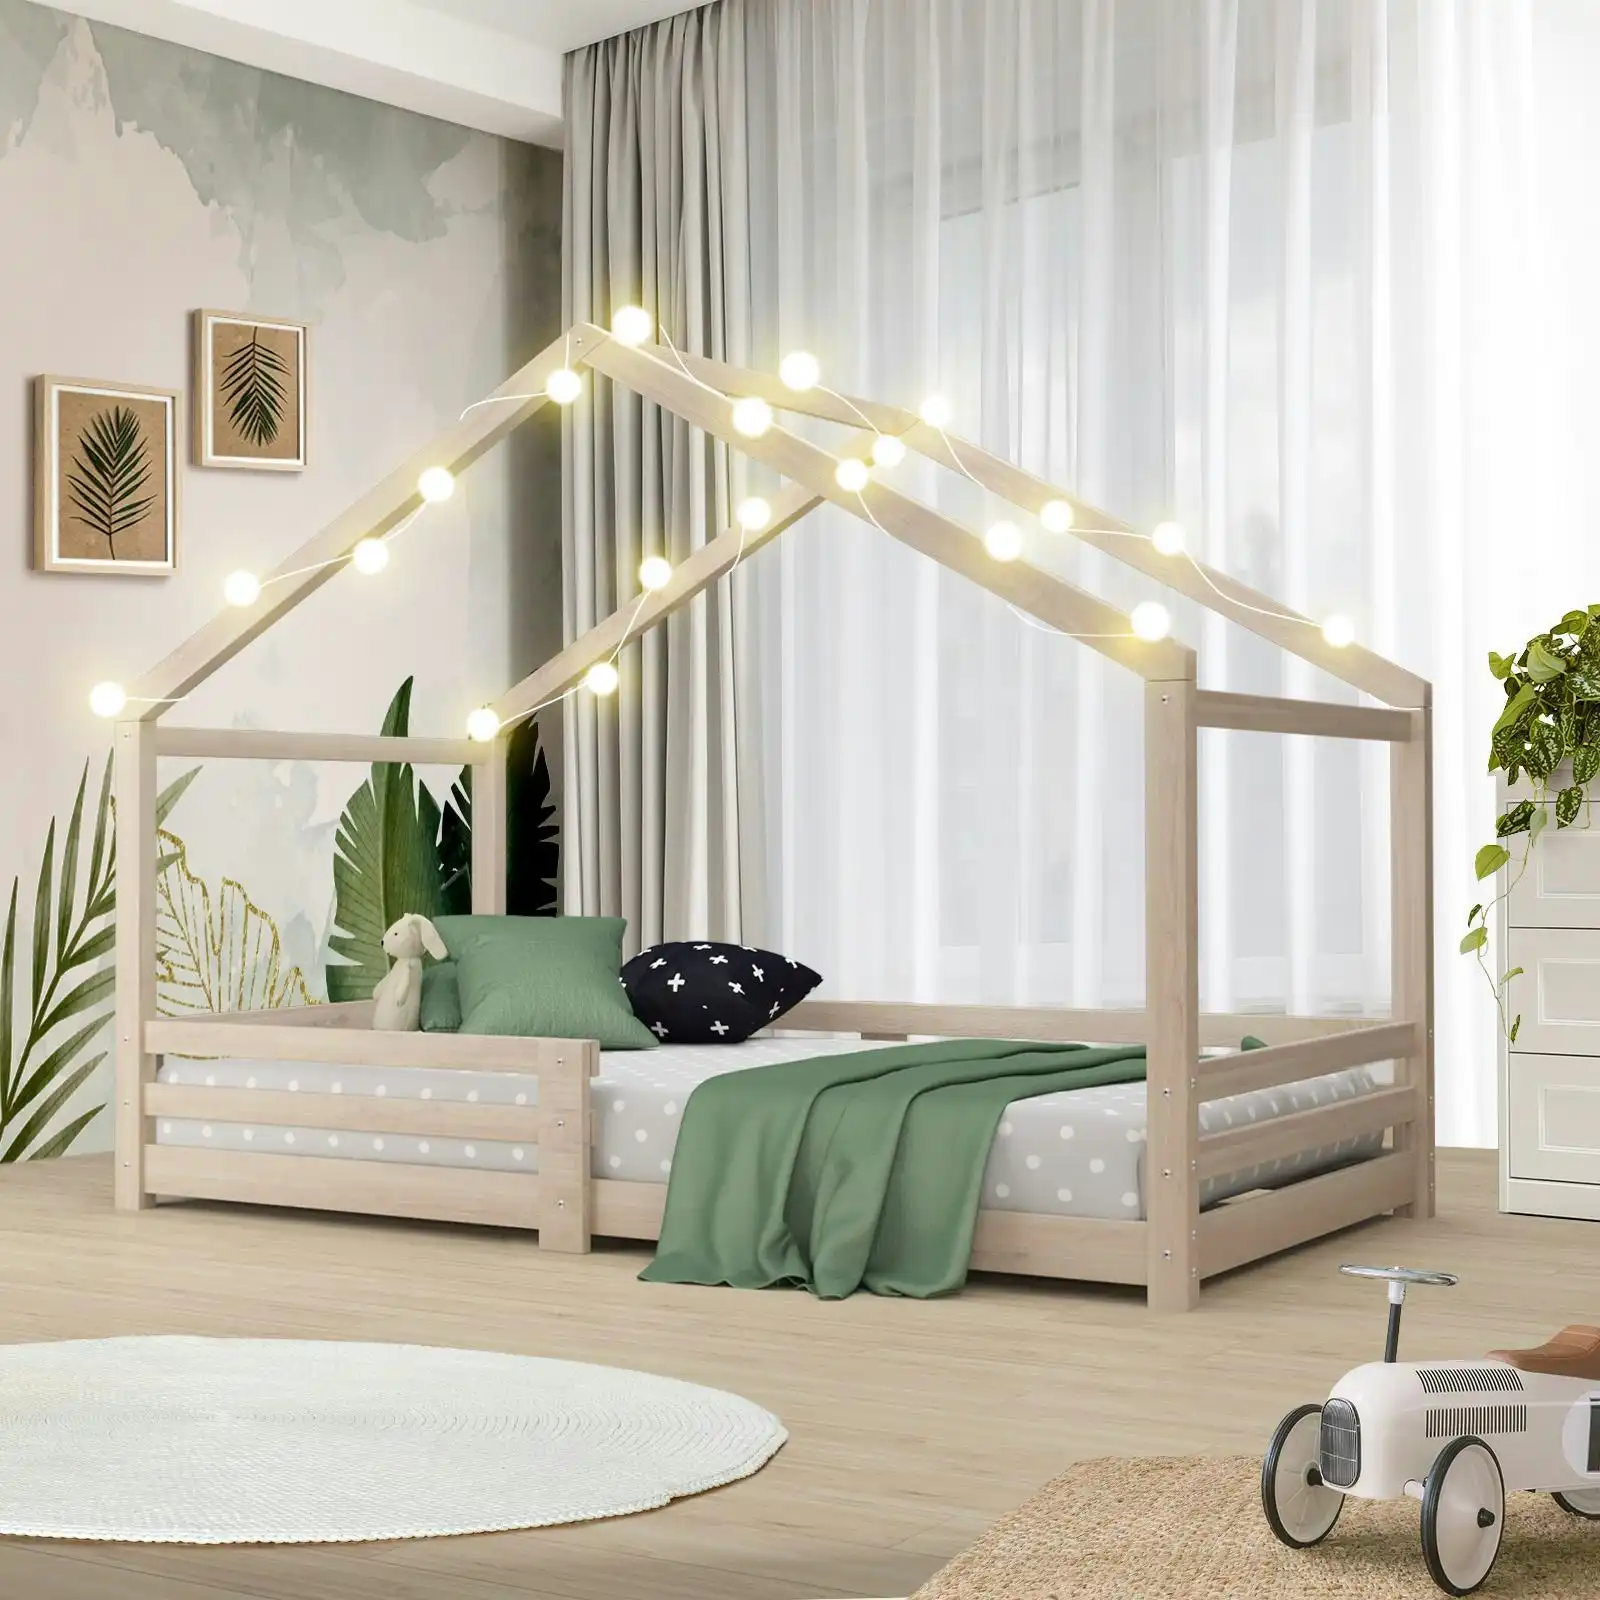 Oikiture Kids Wooden House Single Bed